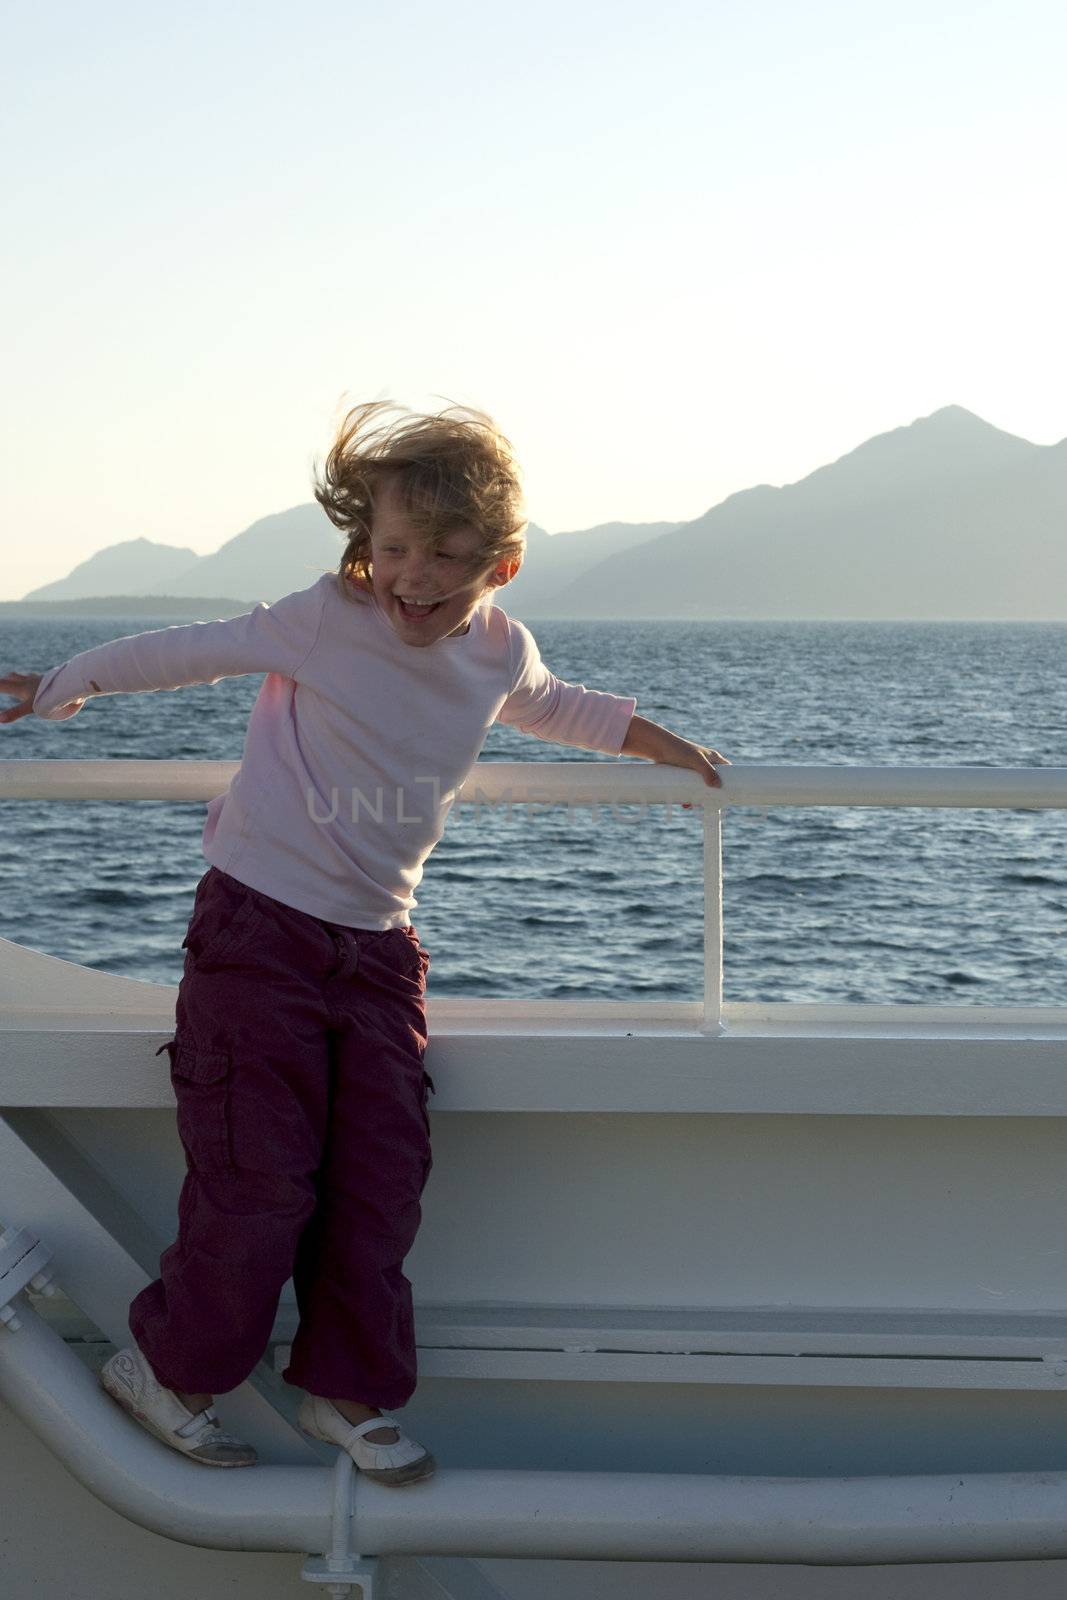 Girl laughing in the wind on a boat